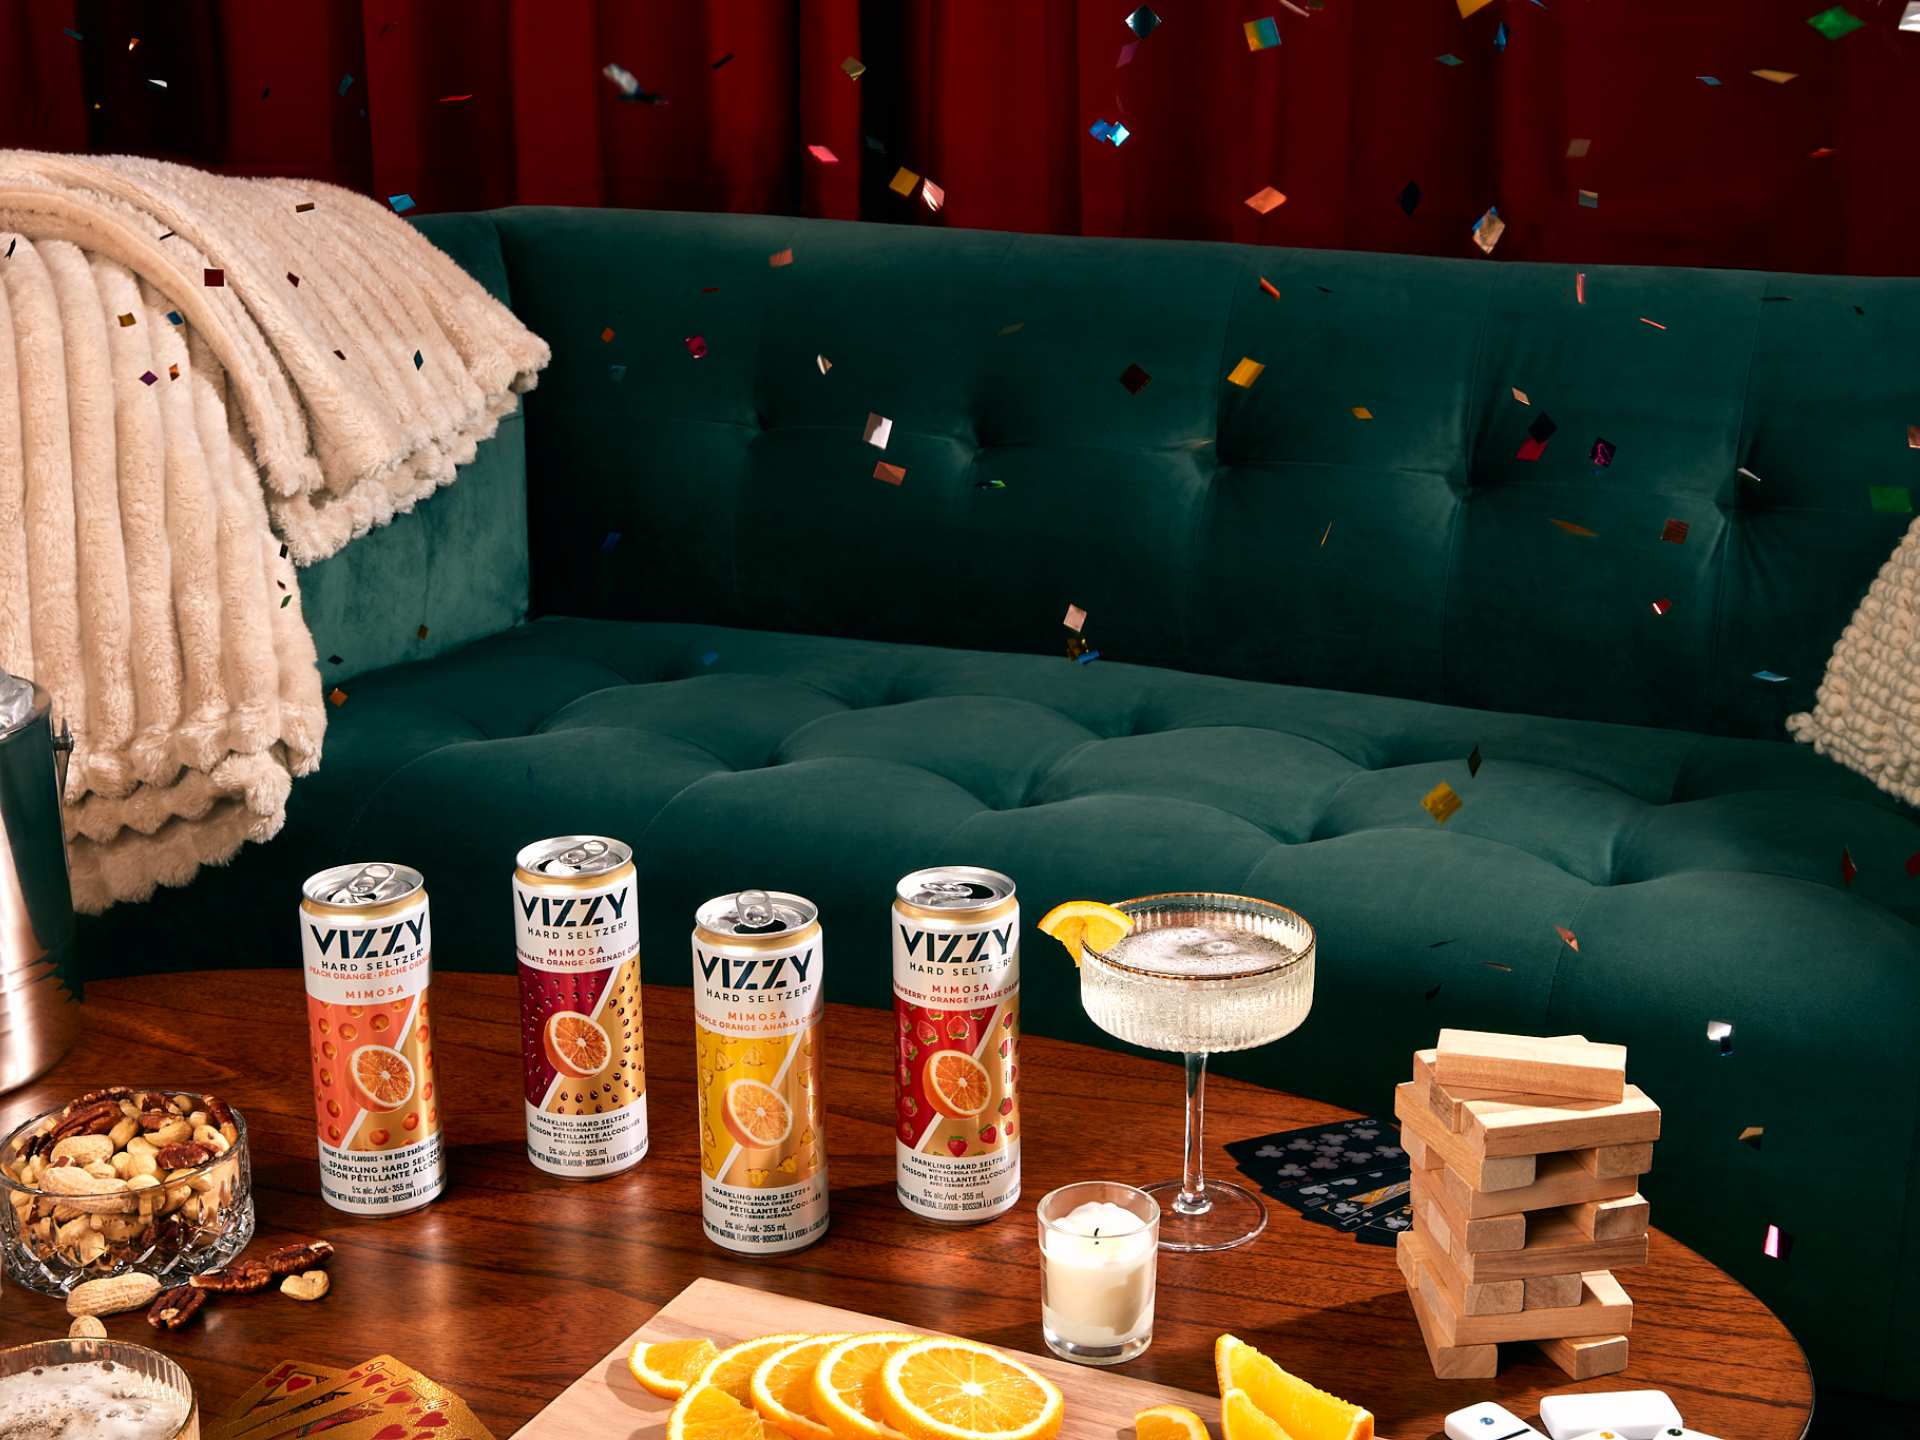 Cans of Vizzy with a green couch, snacks, games and confetti